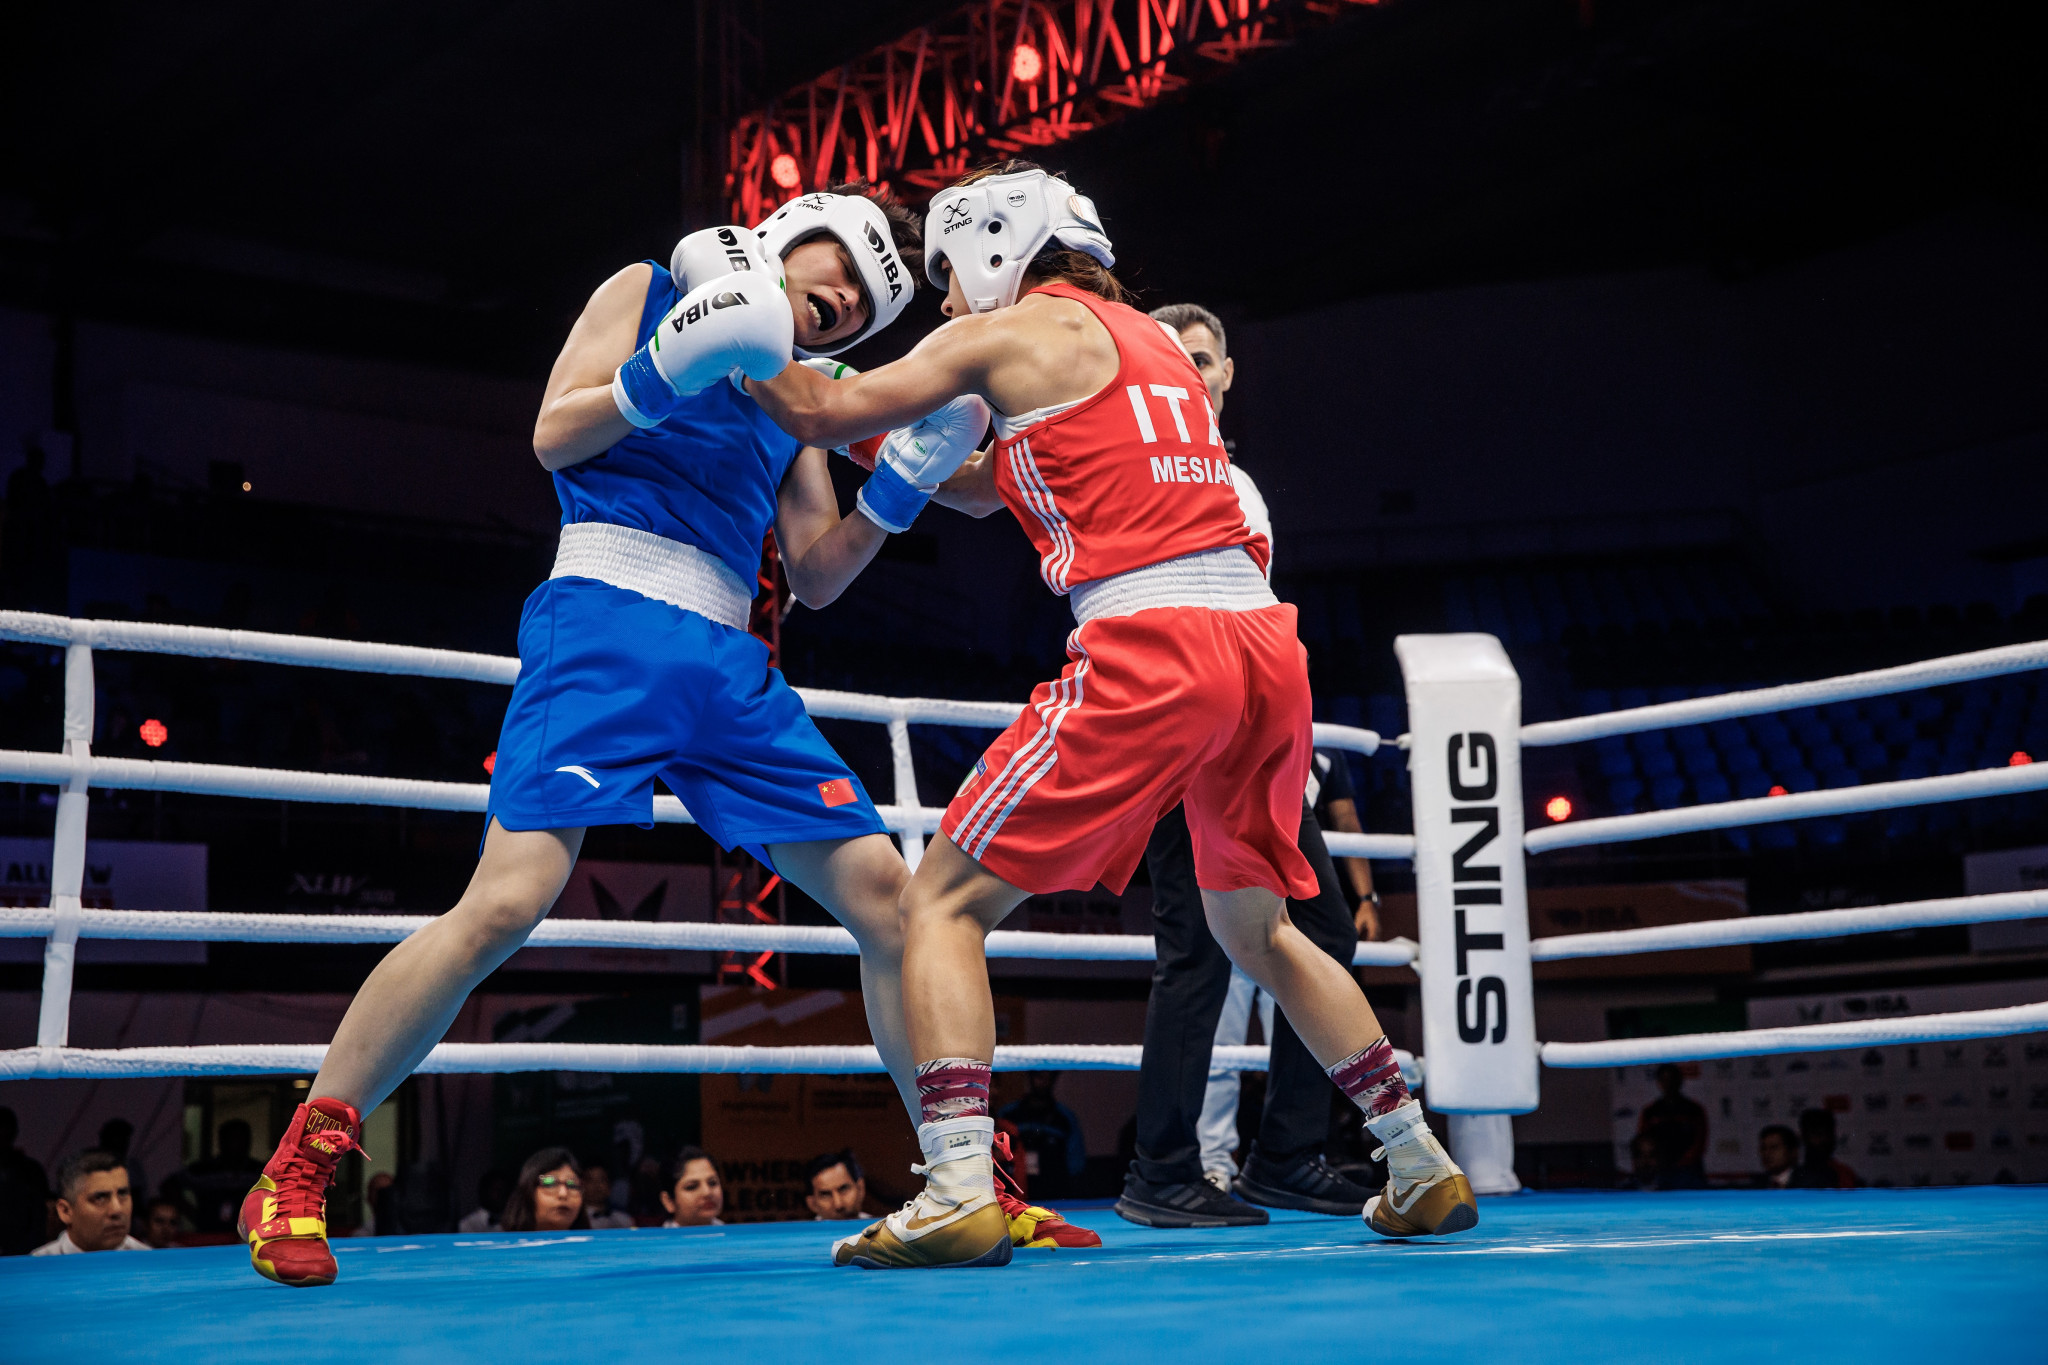 China's Yang Weng pulled off one of the shots of the tournament so far when she defeated former world featherweight champion Alessia Mesiano of Italy ©IBA